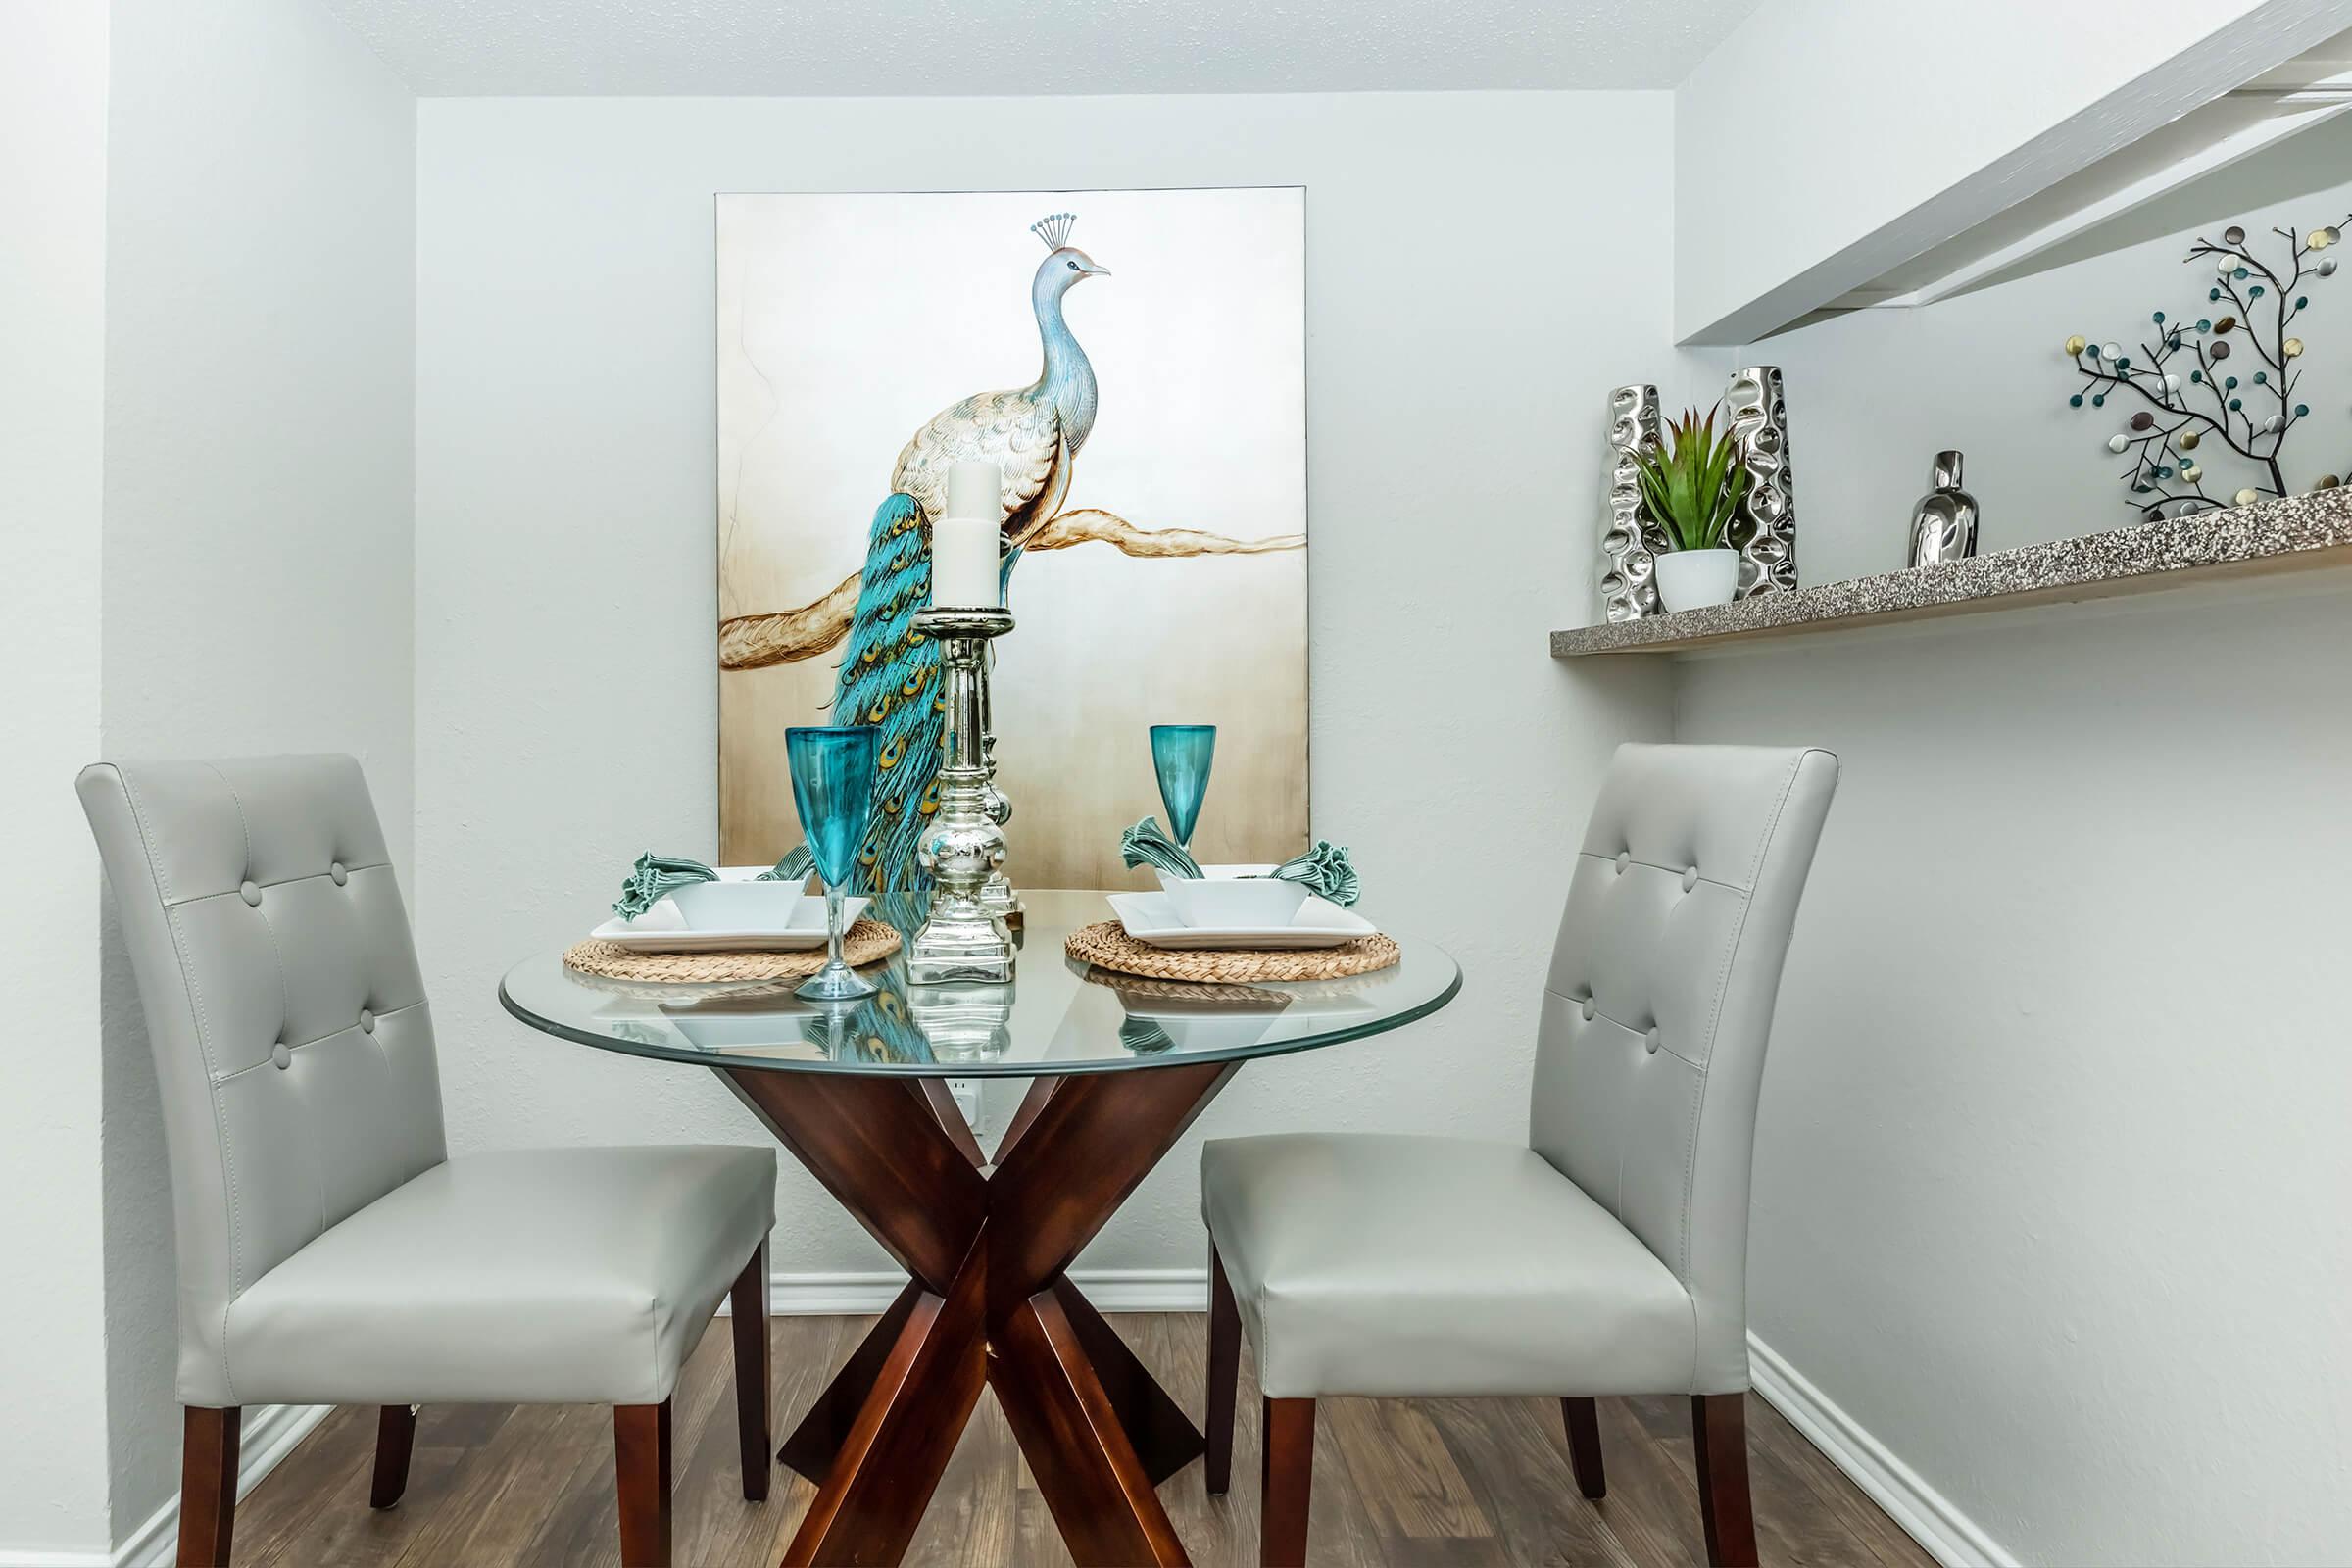 DINNER IN YOUR DINING NOOK